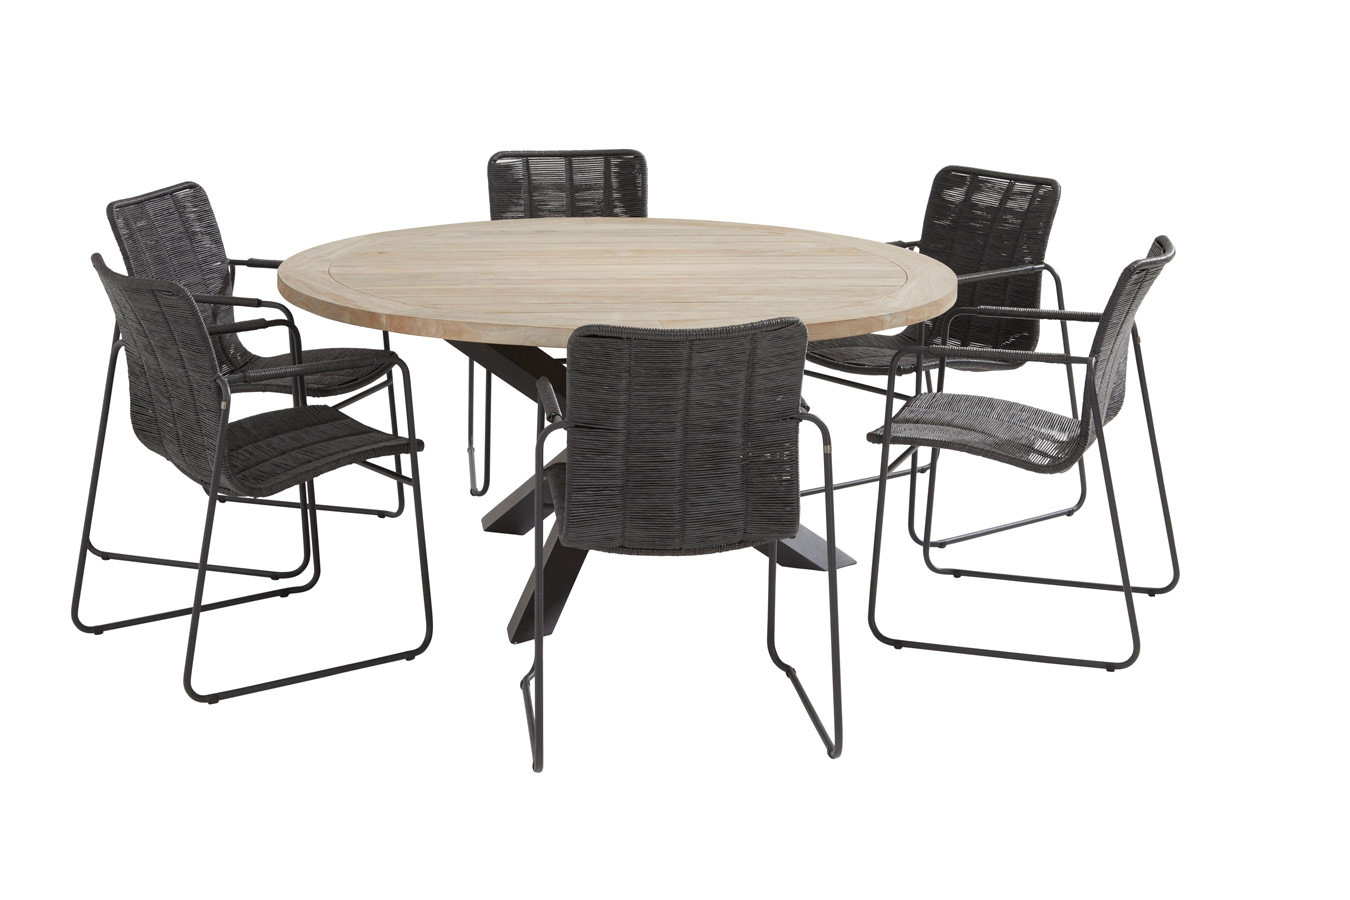 Palma anthracite dining set with round Louvre table 160 cm